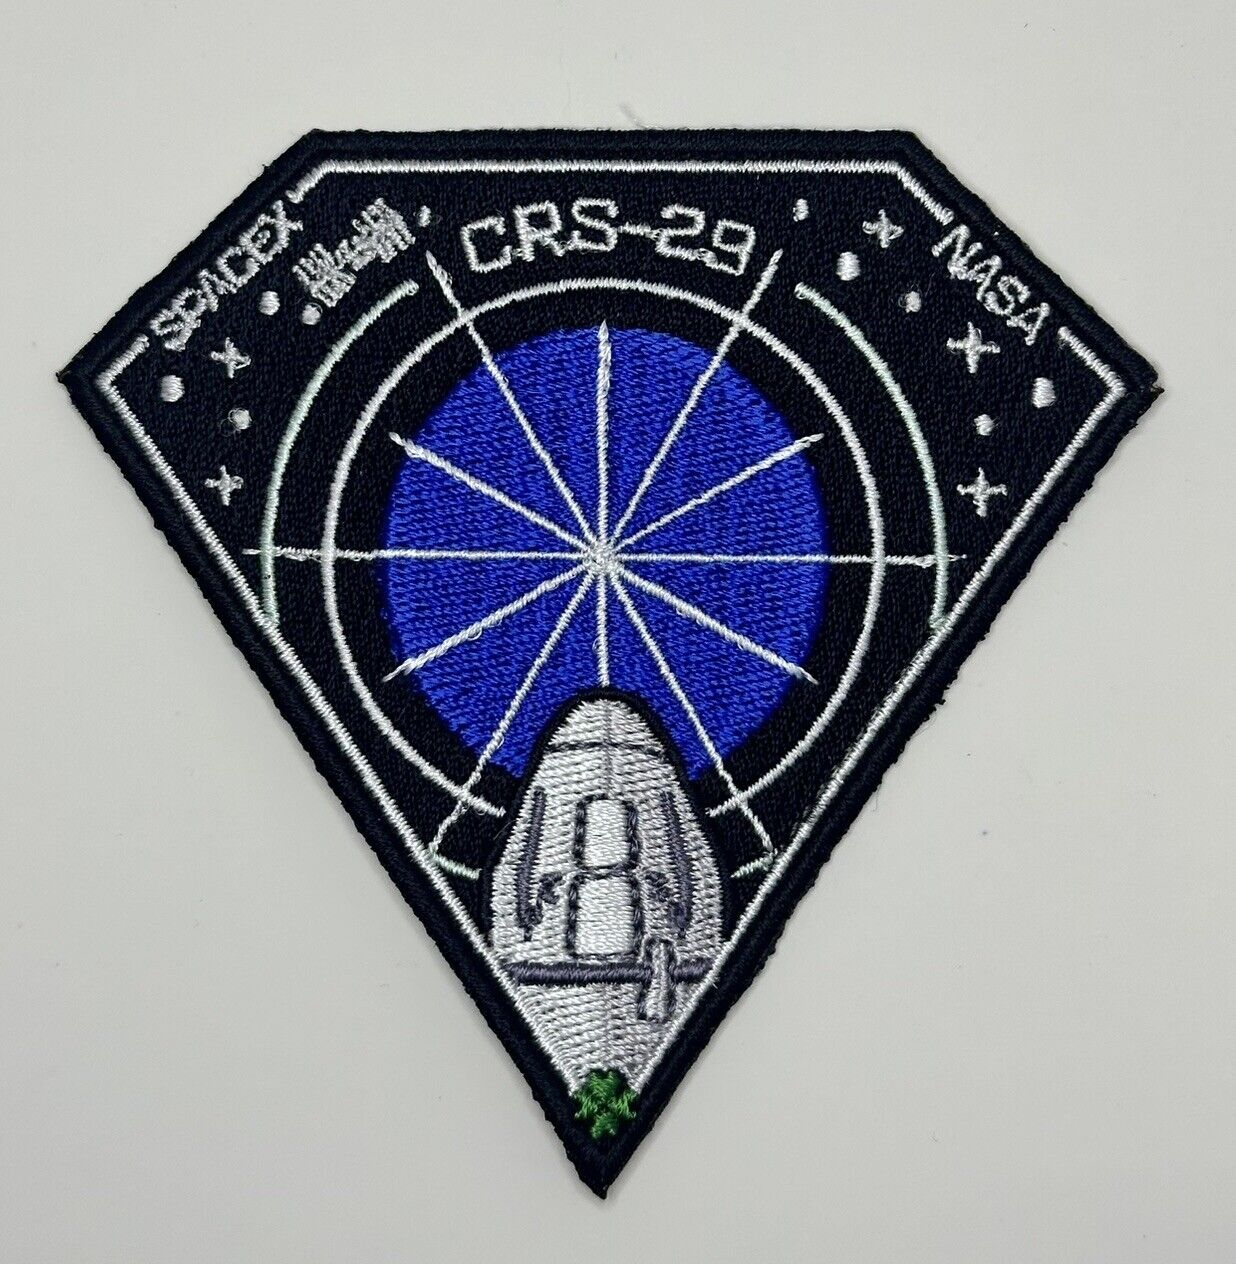 Original SPACEX CRS-29 DRAGON ISS RESUPPLY MISSION PATCH 3” NASA FALCON 9